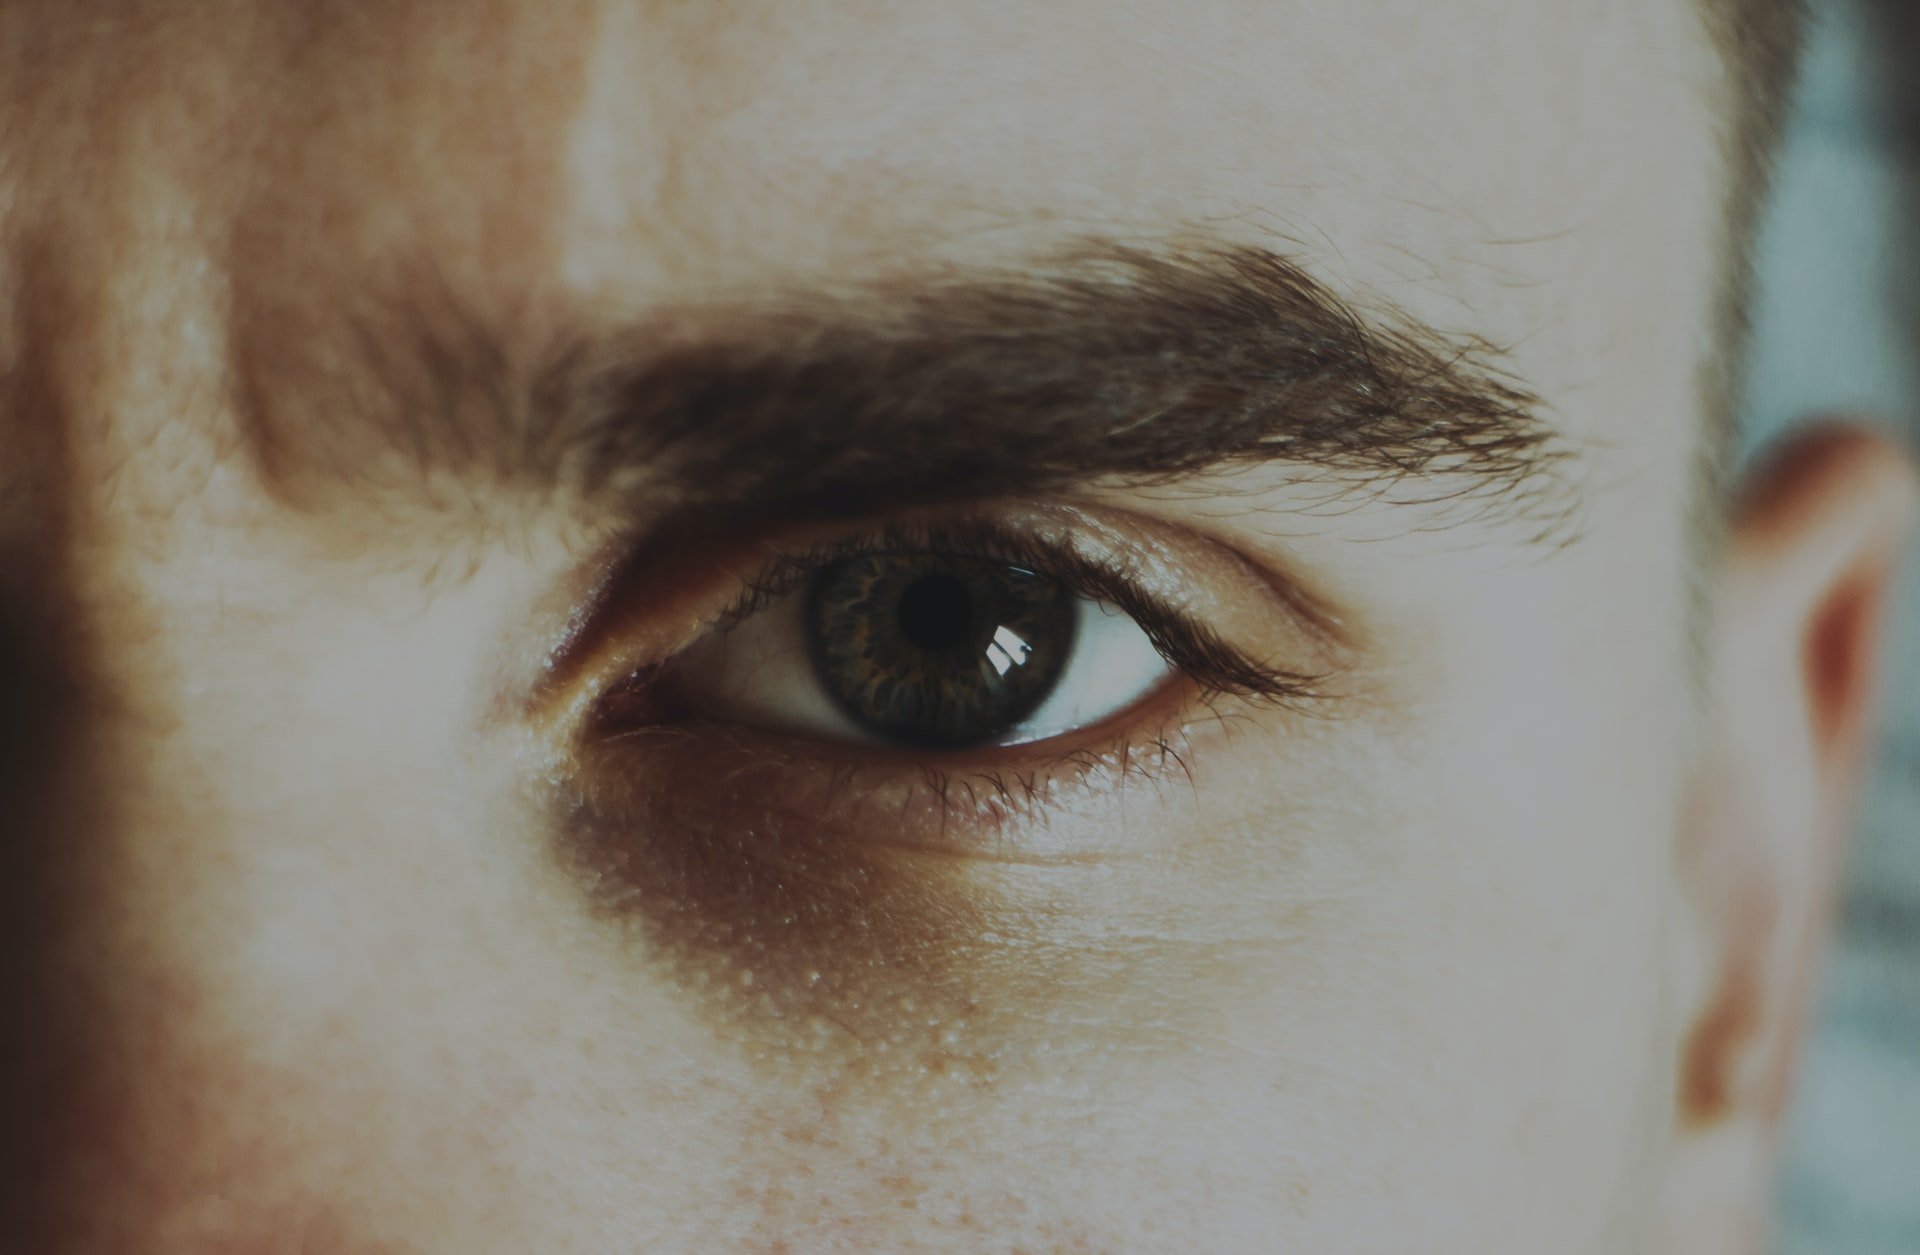 A closeup of a man's eye with a frown on his brow | Source: Unsplash